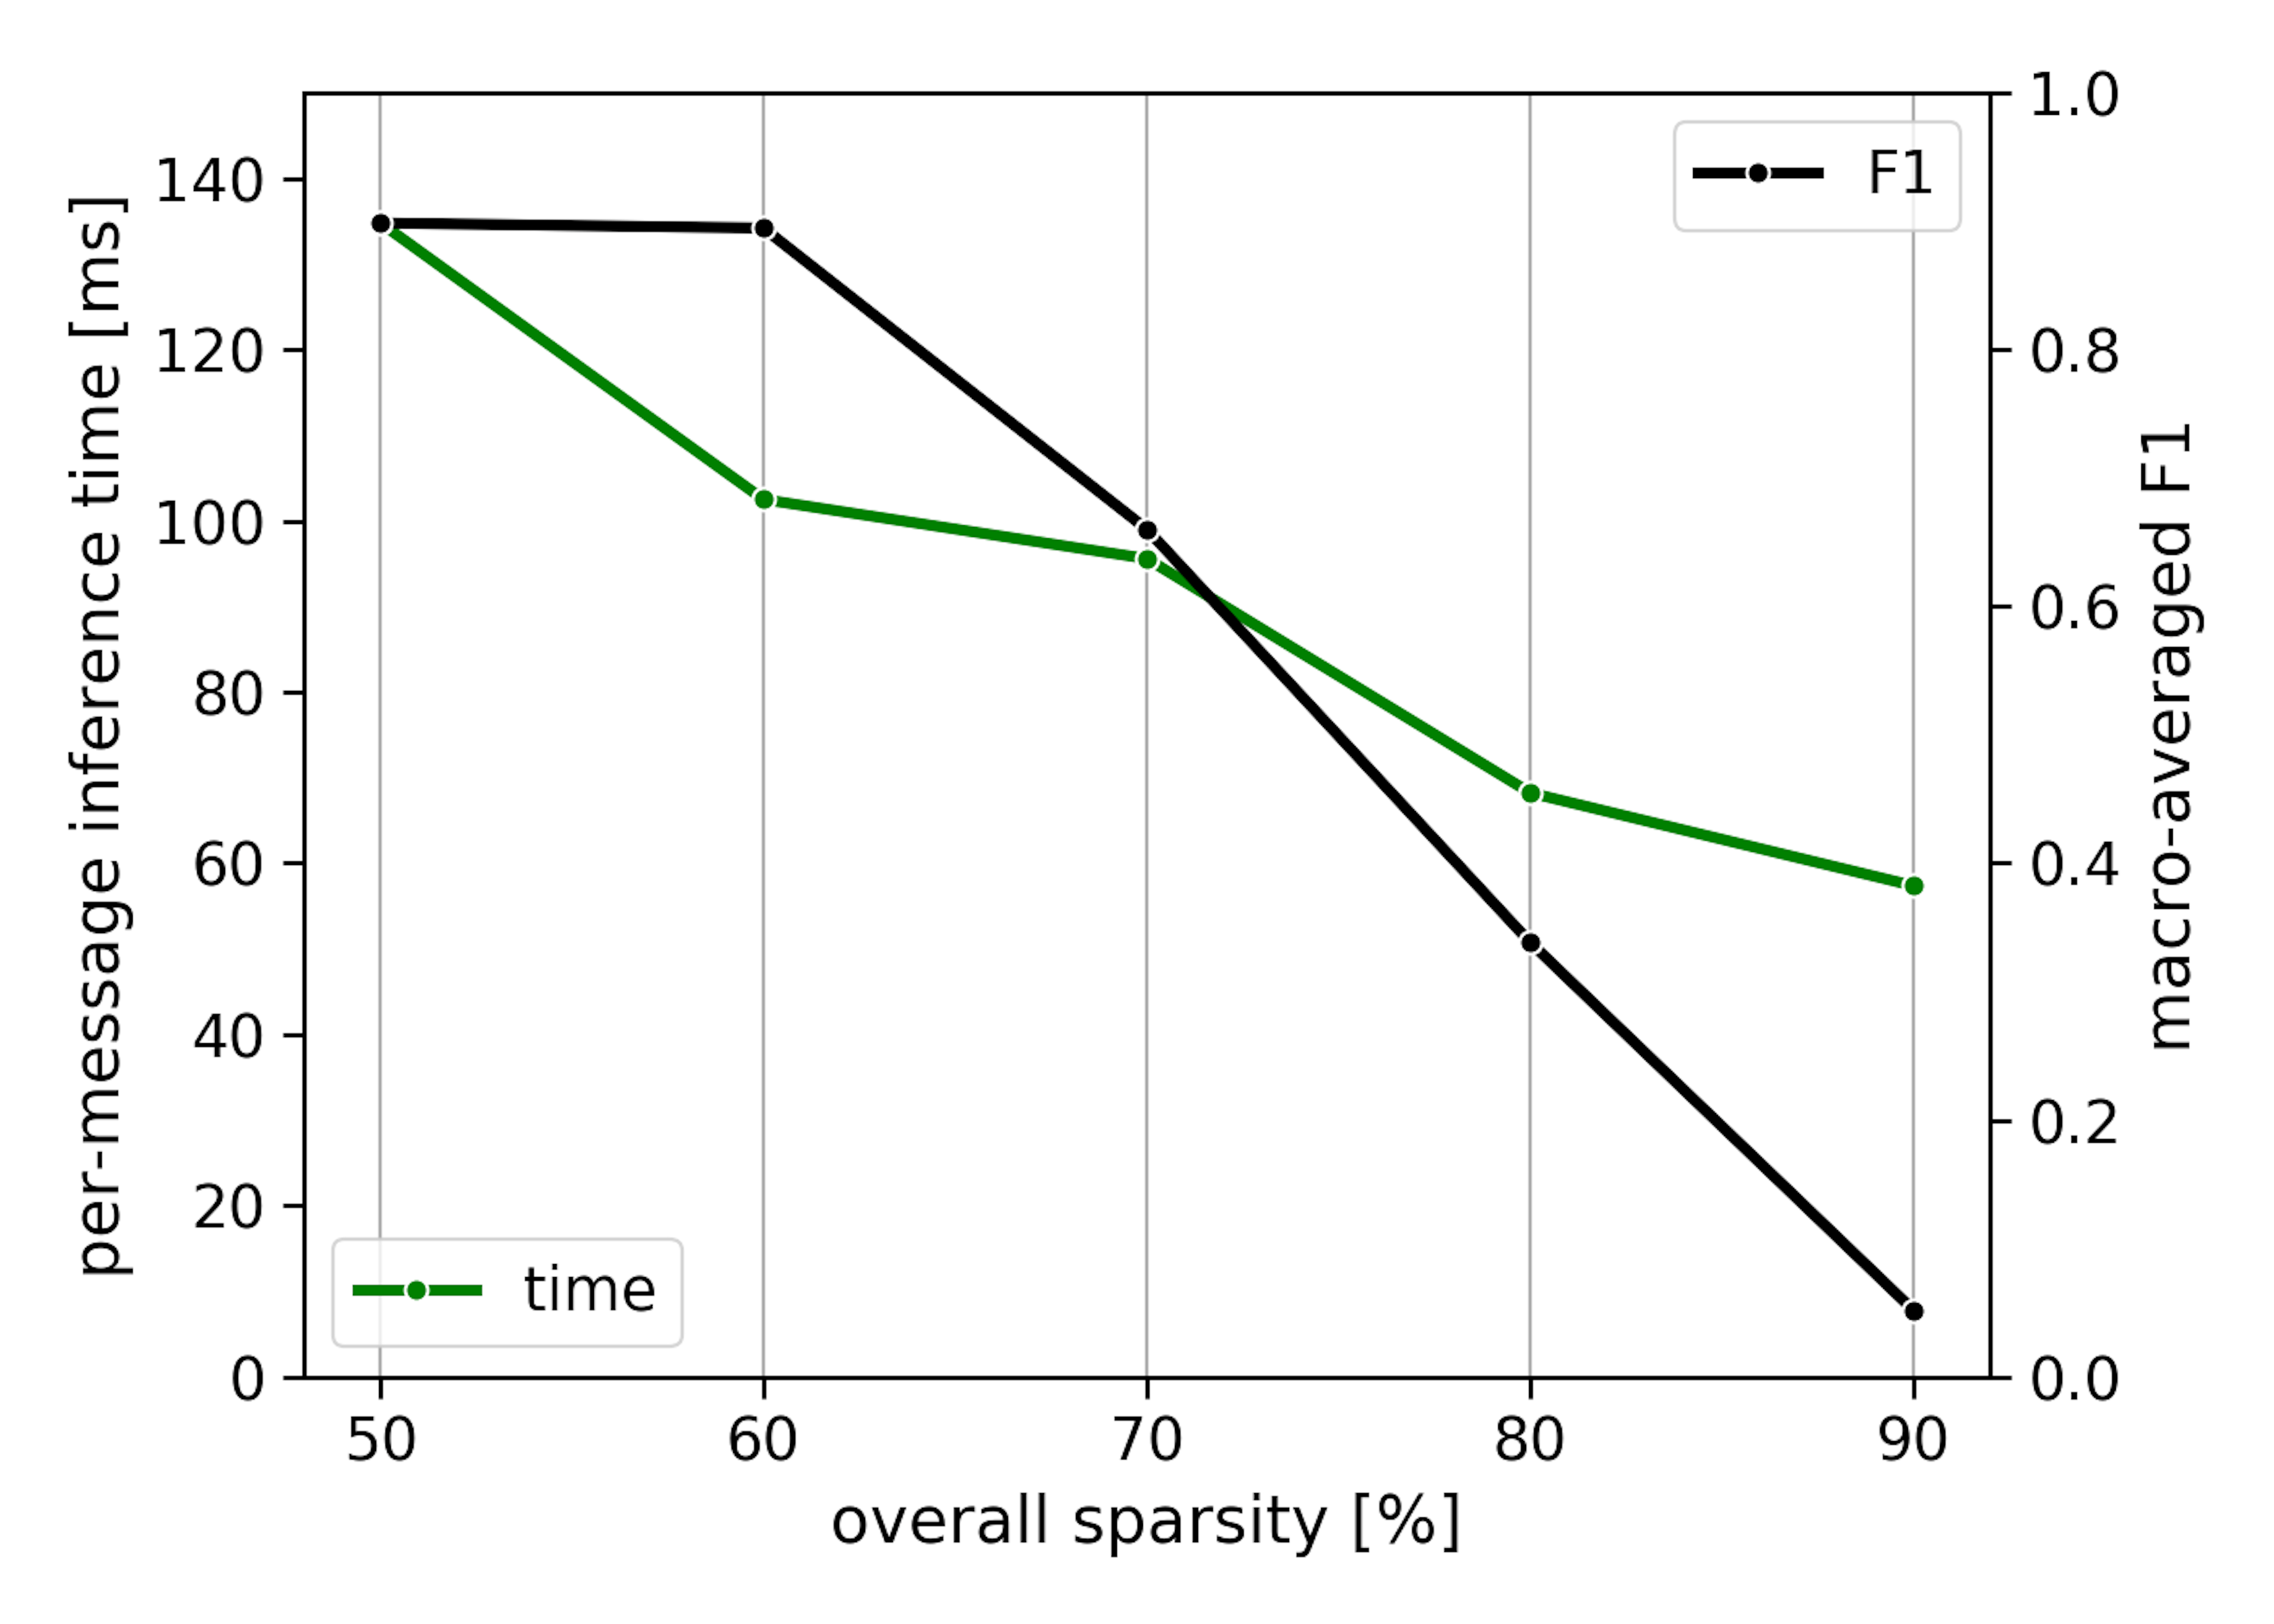 model speed and F1 vs overall sparsity